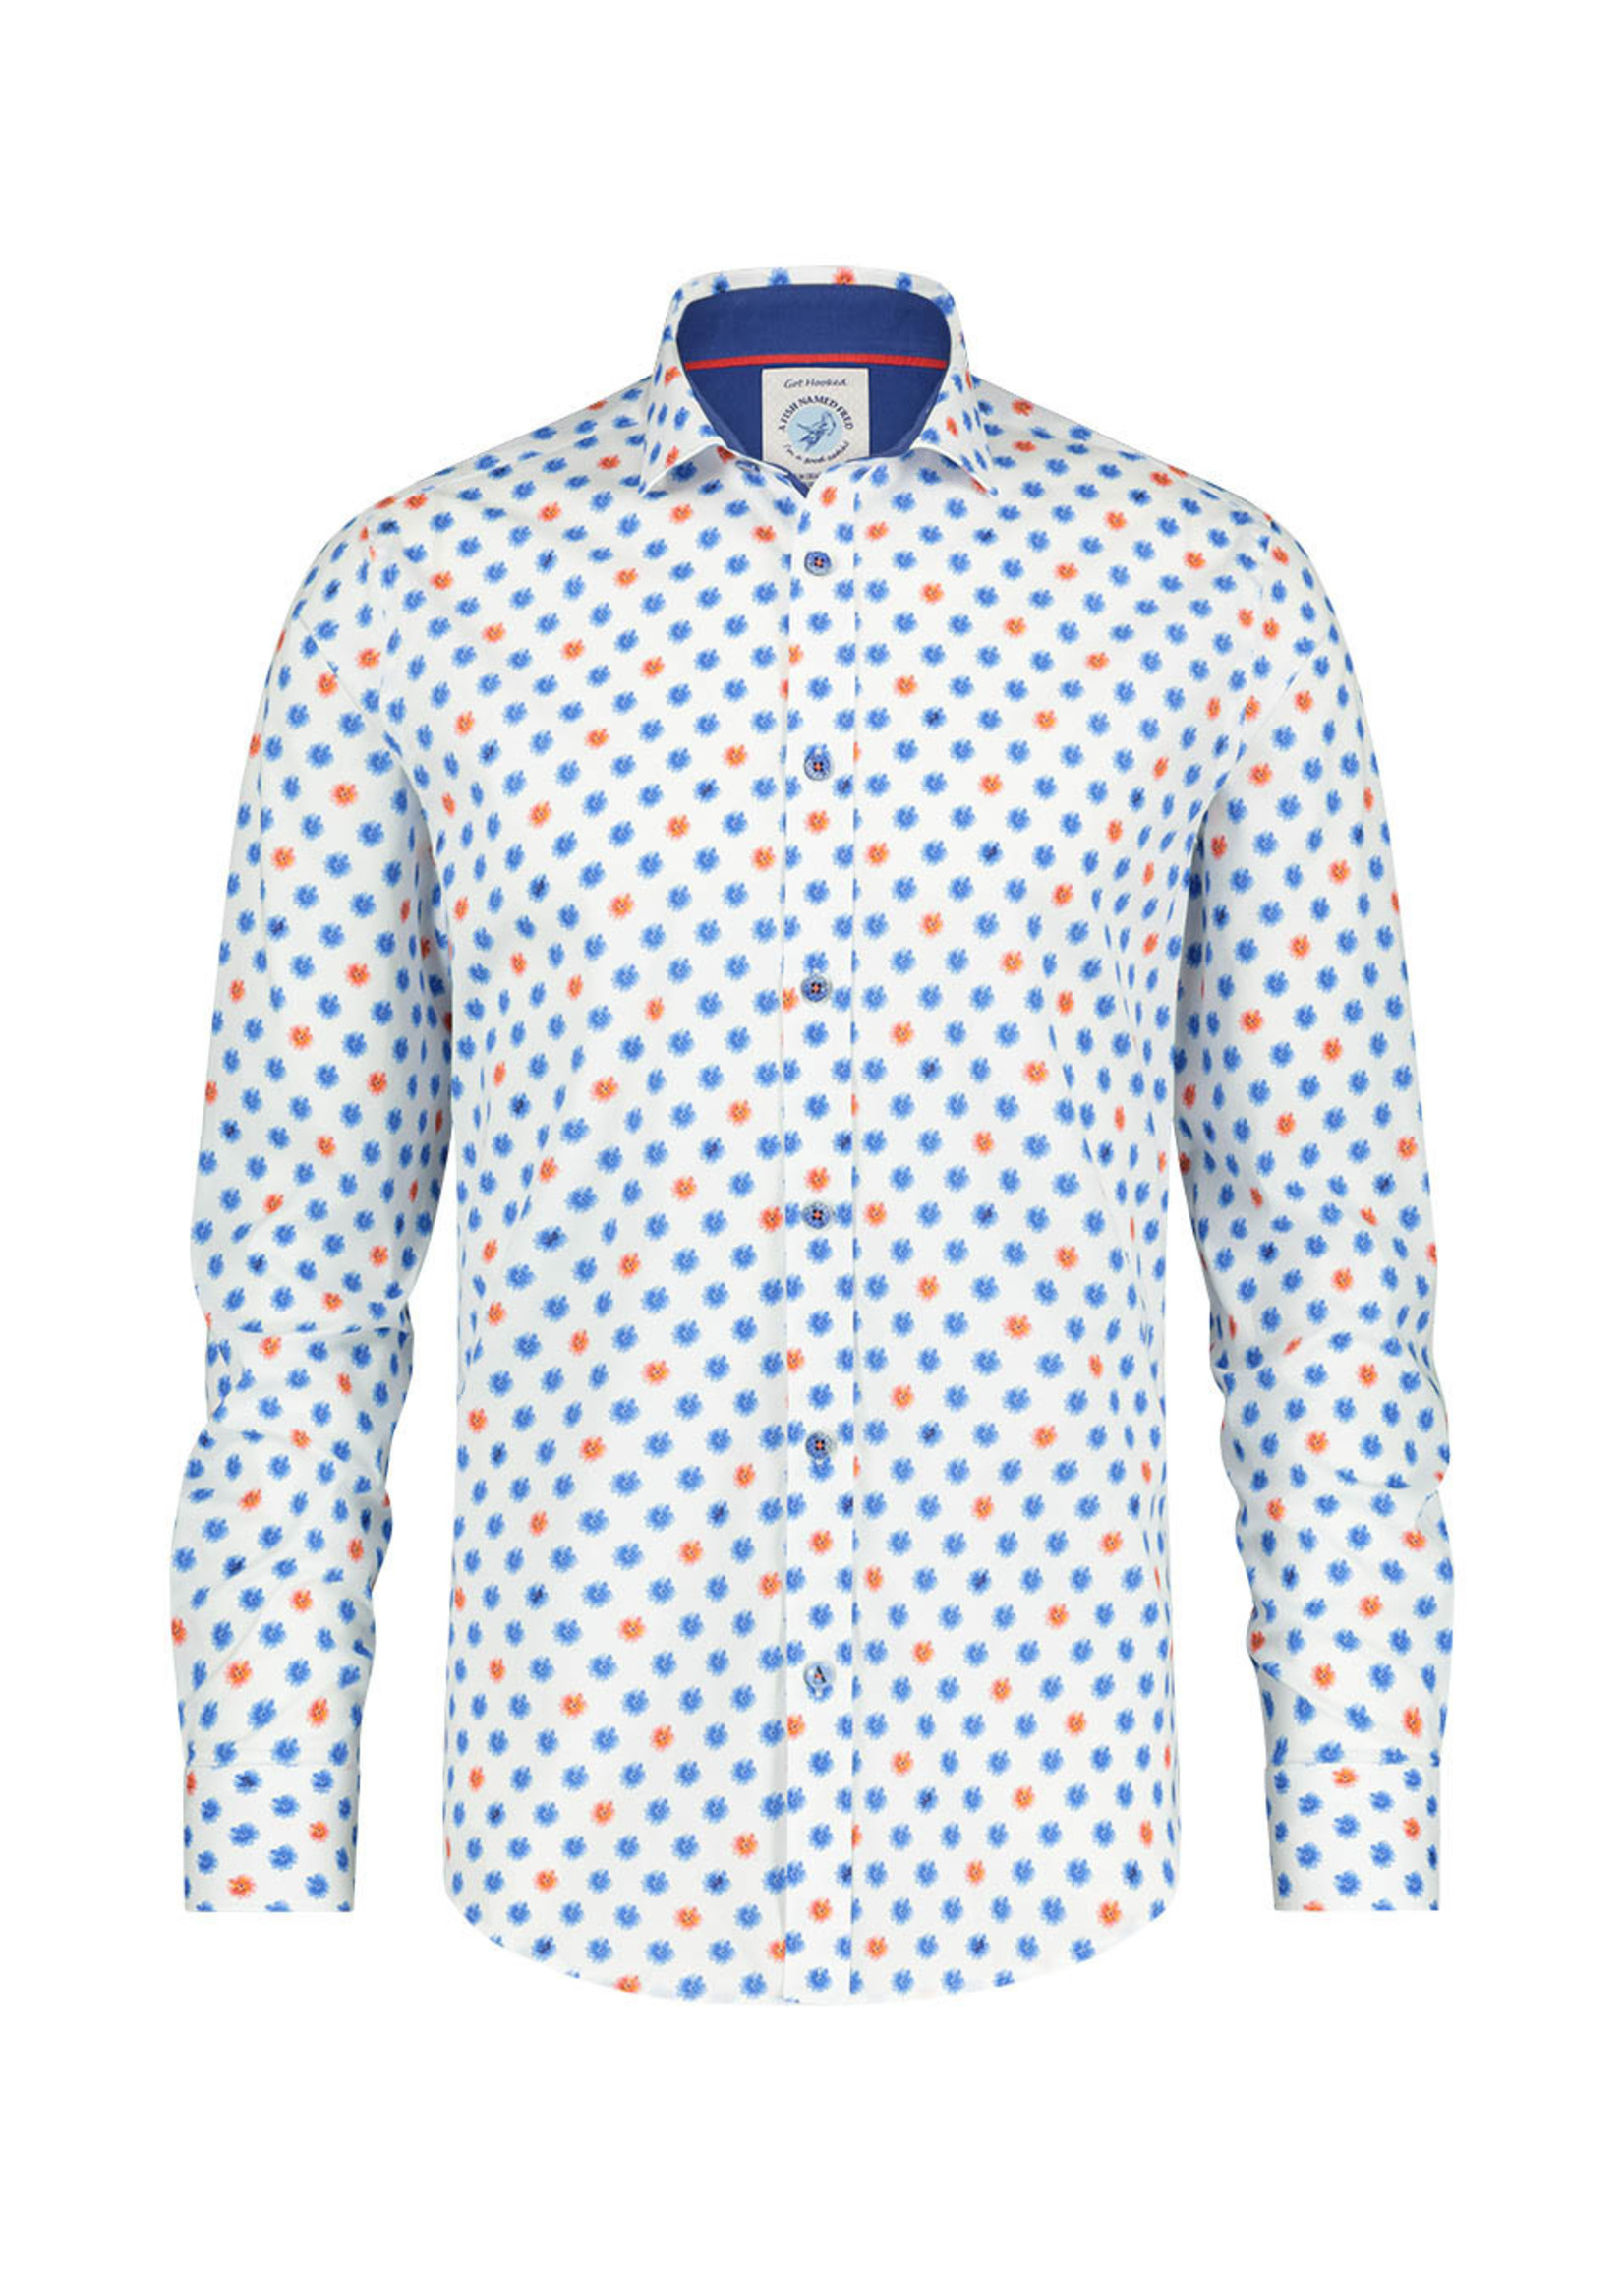 A FISH NAMED FRED Men's Shirt with light blue flower print